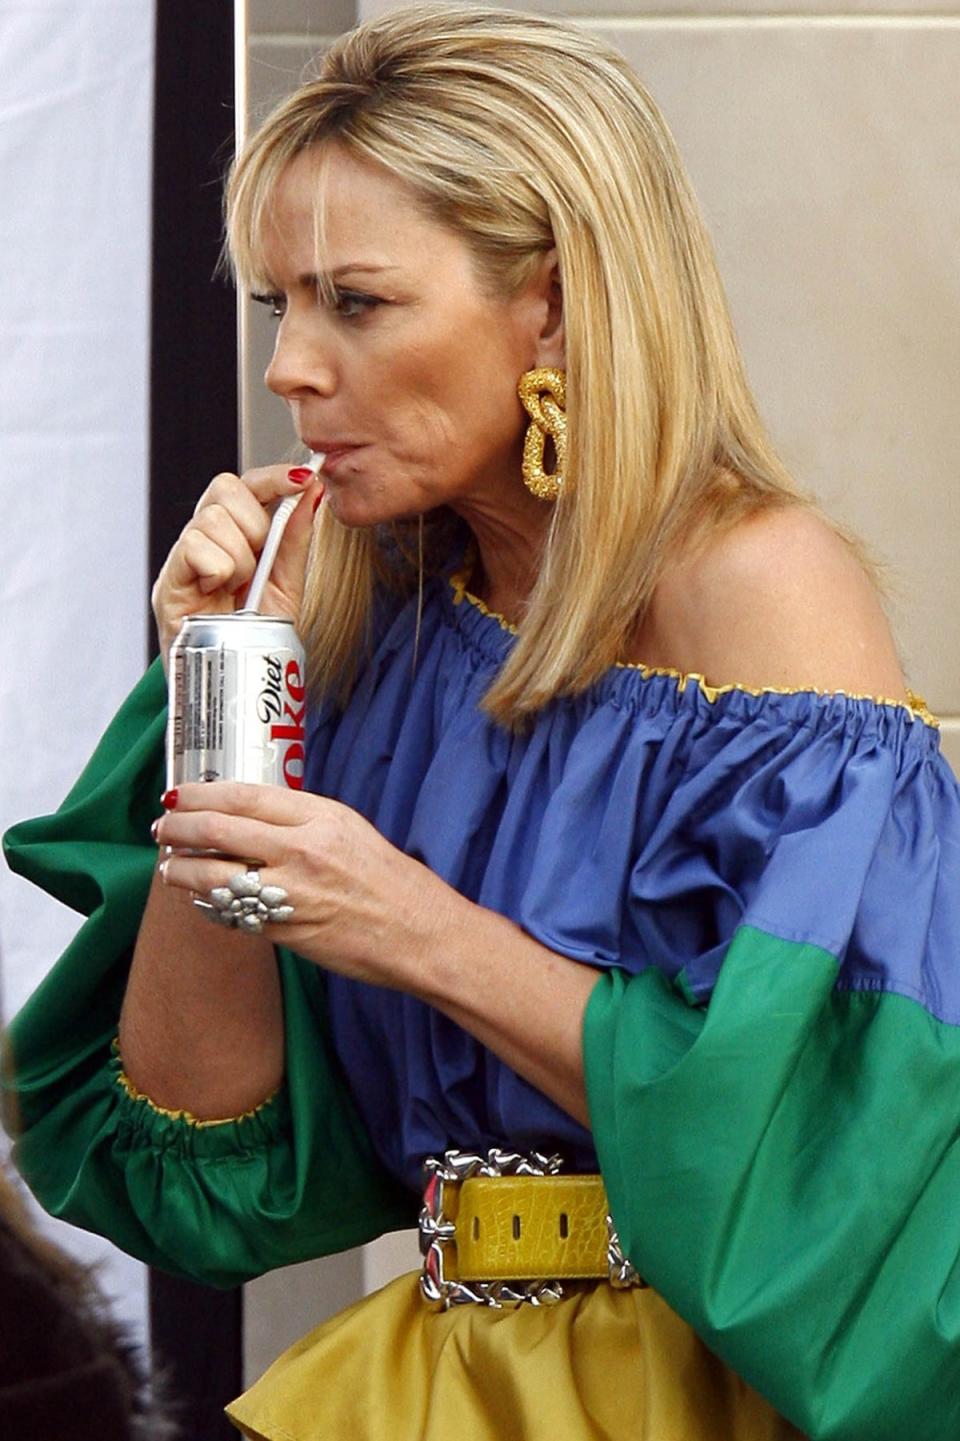 Kim Cattrall sips from a Diet Coke on the set of the ‘Sex and the City’ movie in 2007 (London Entertainment/Shutterstock)